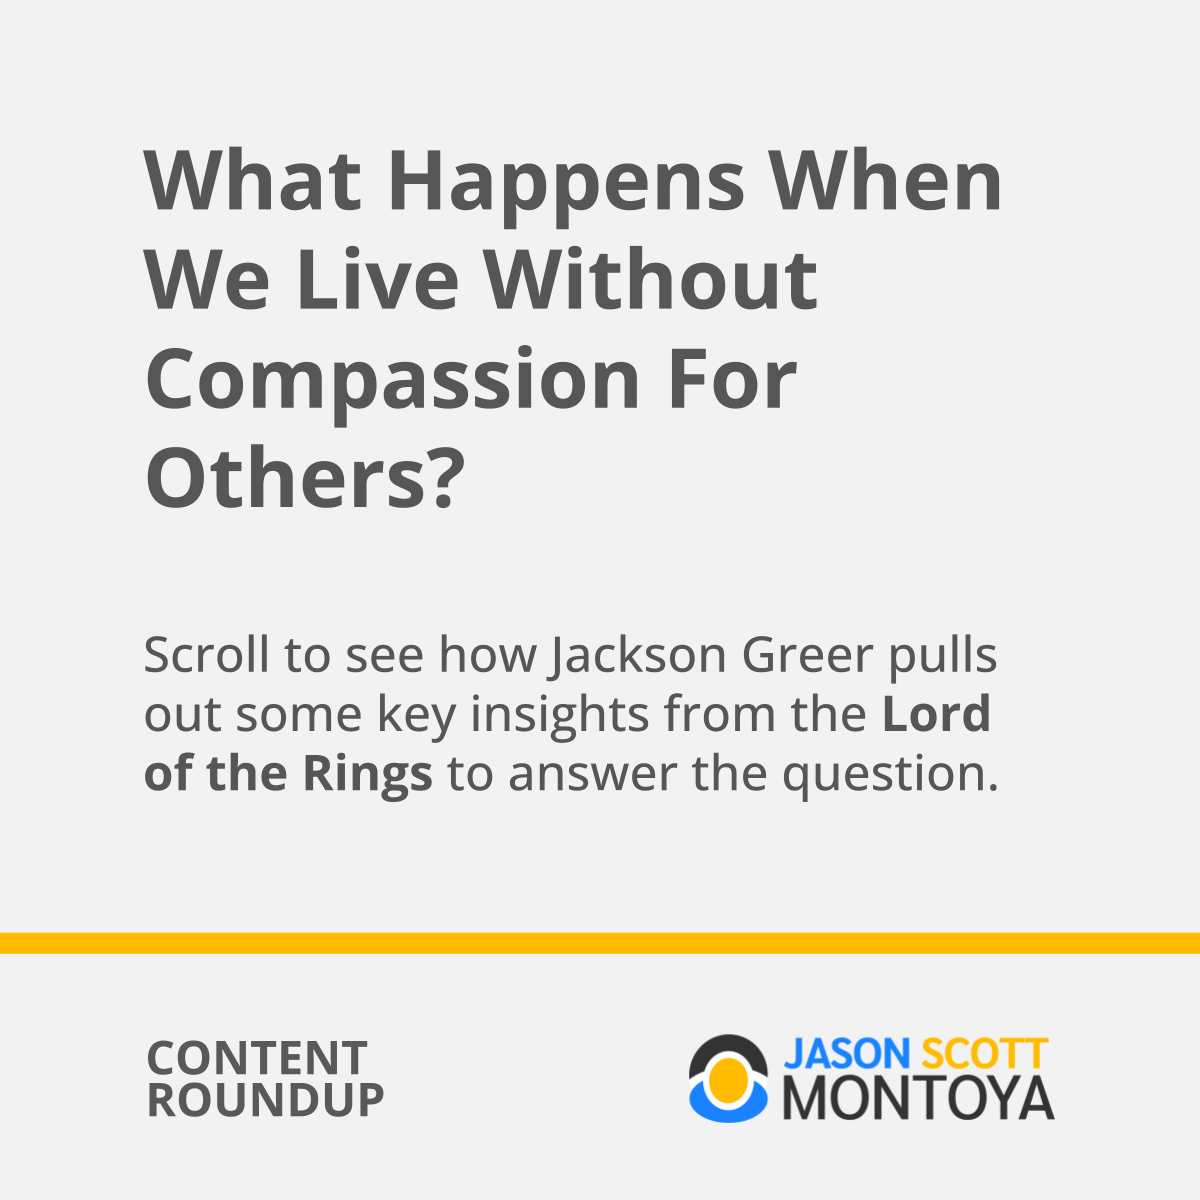 What Happens When We Live Without Compassion For Others?  Scroll to see how Jackson Greer pulls out some key insights from the Lord of the Rings to answer the question.